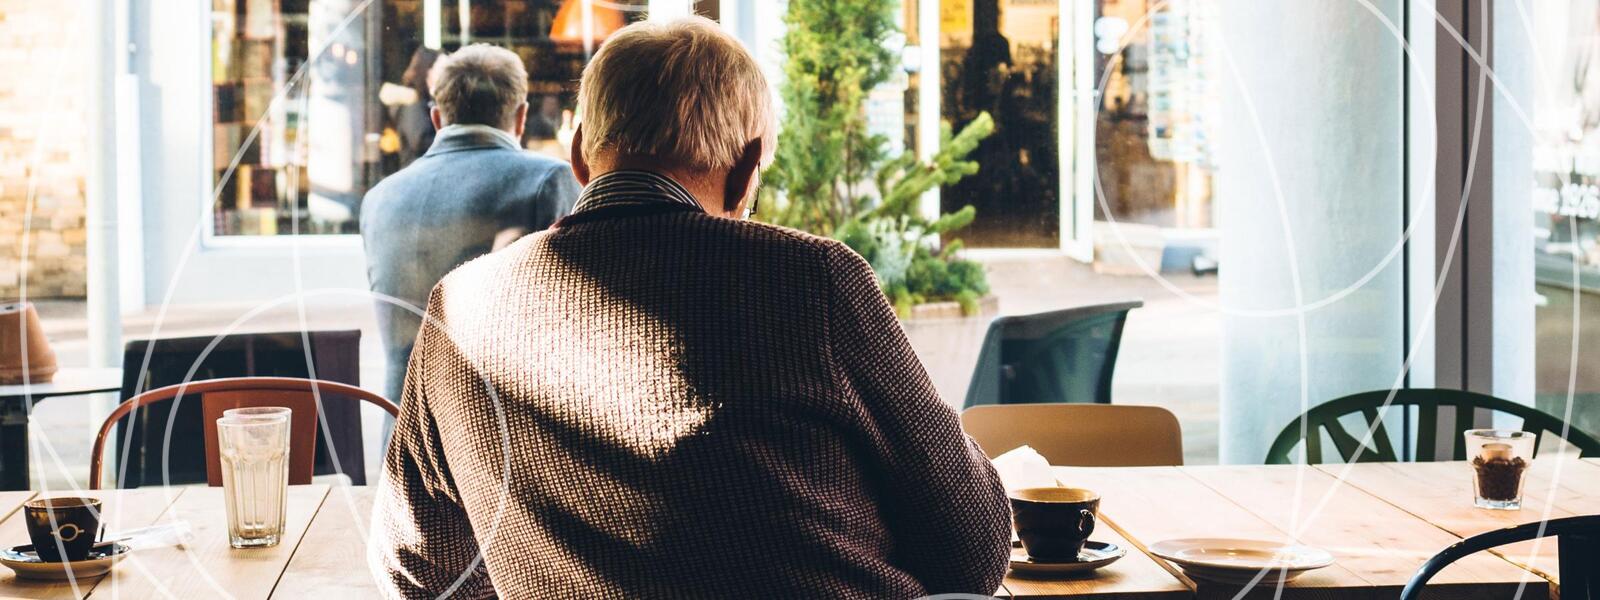 older man's back turned to viewer, studying and reading in coffee shop 